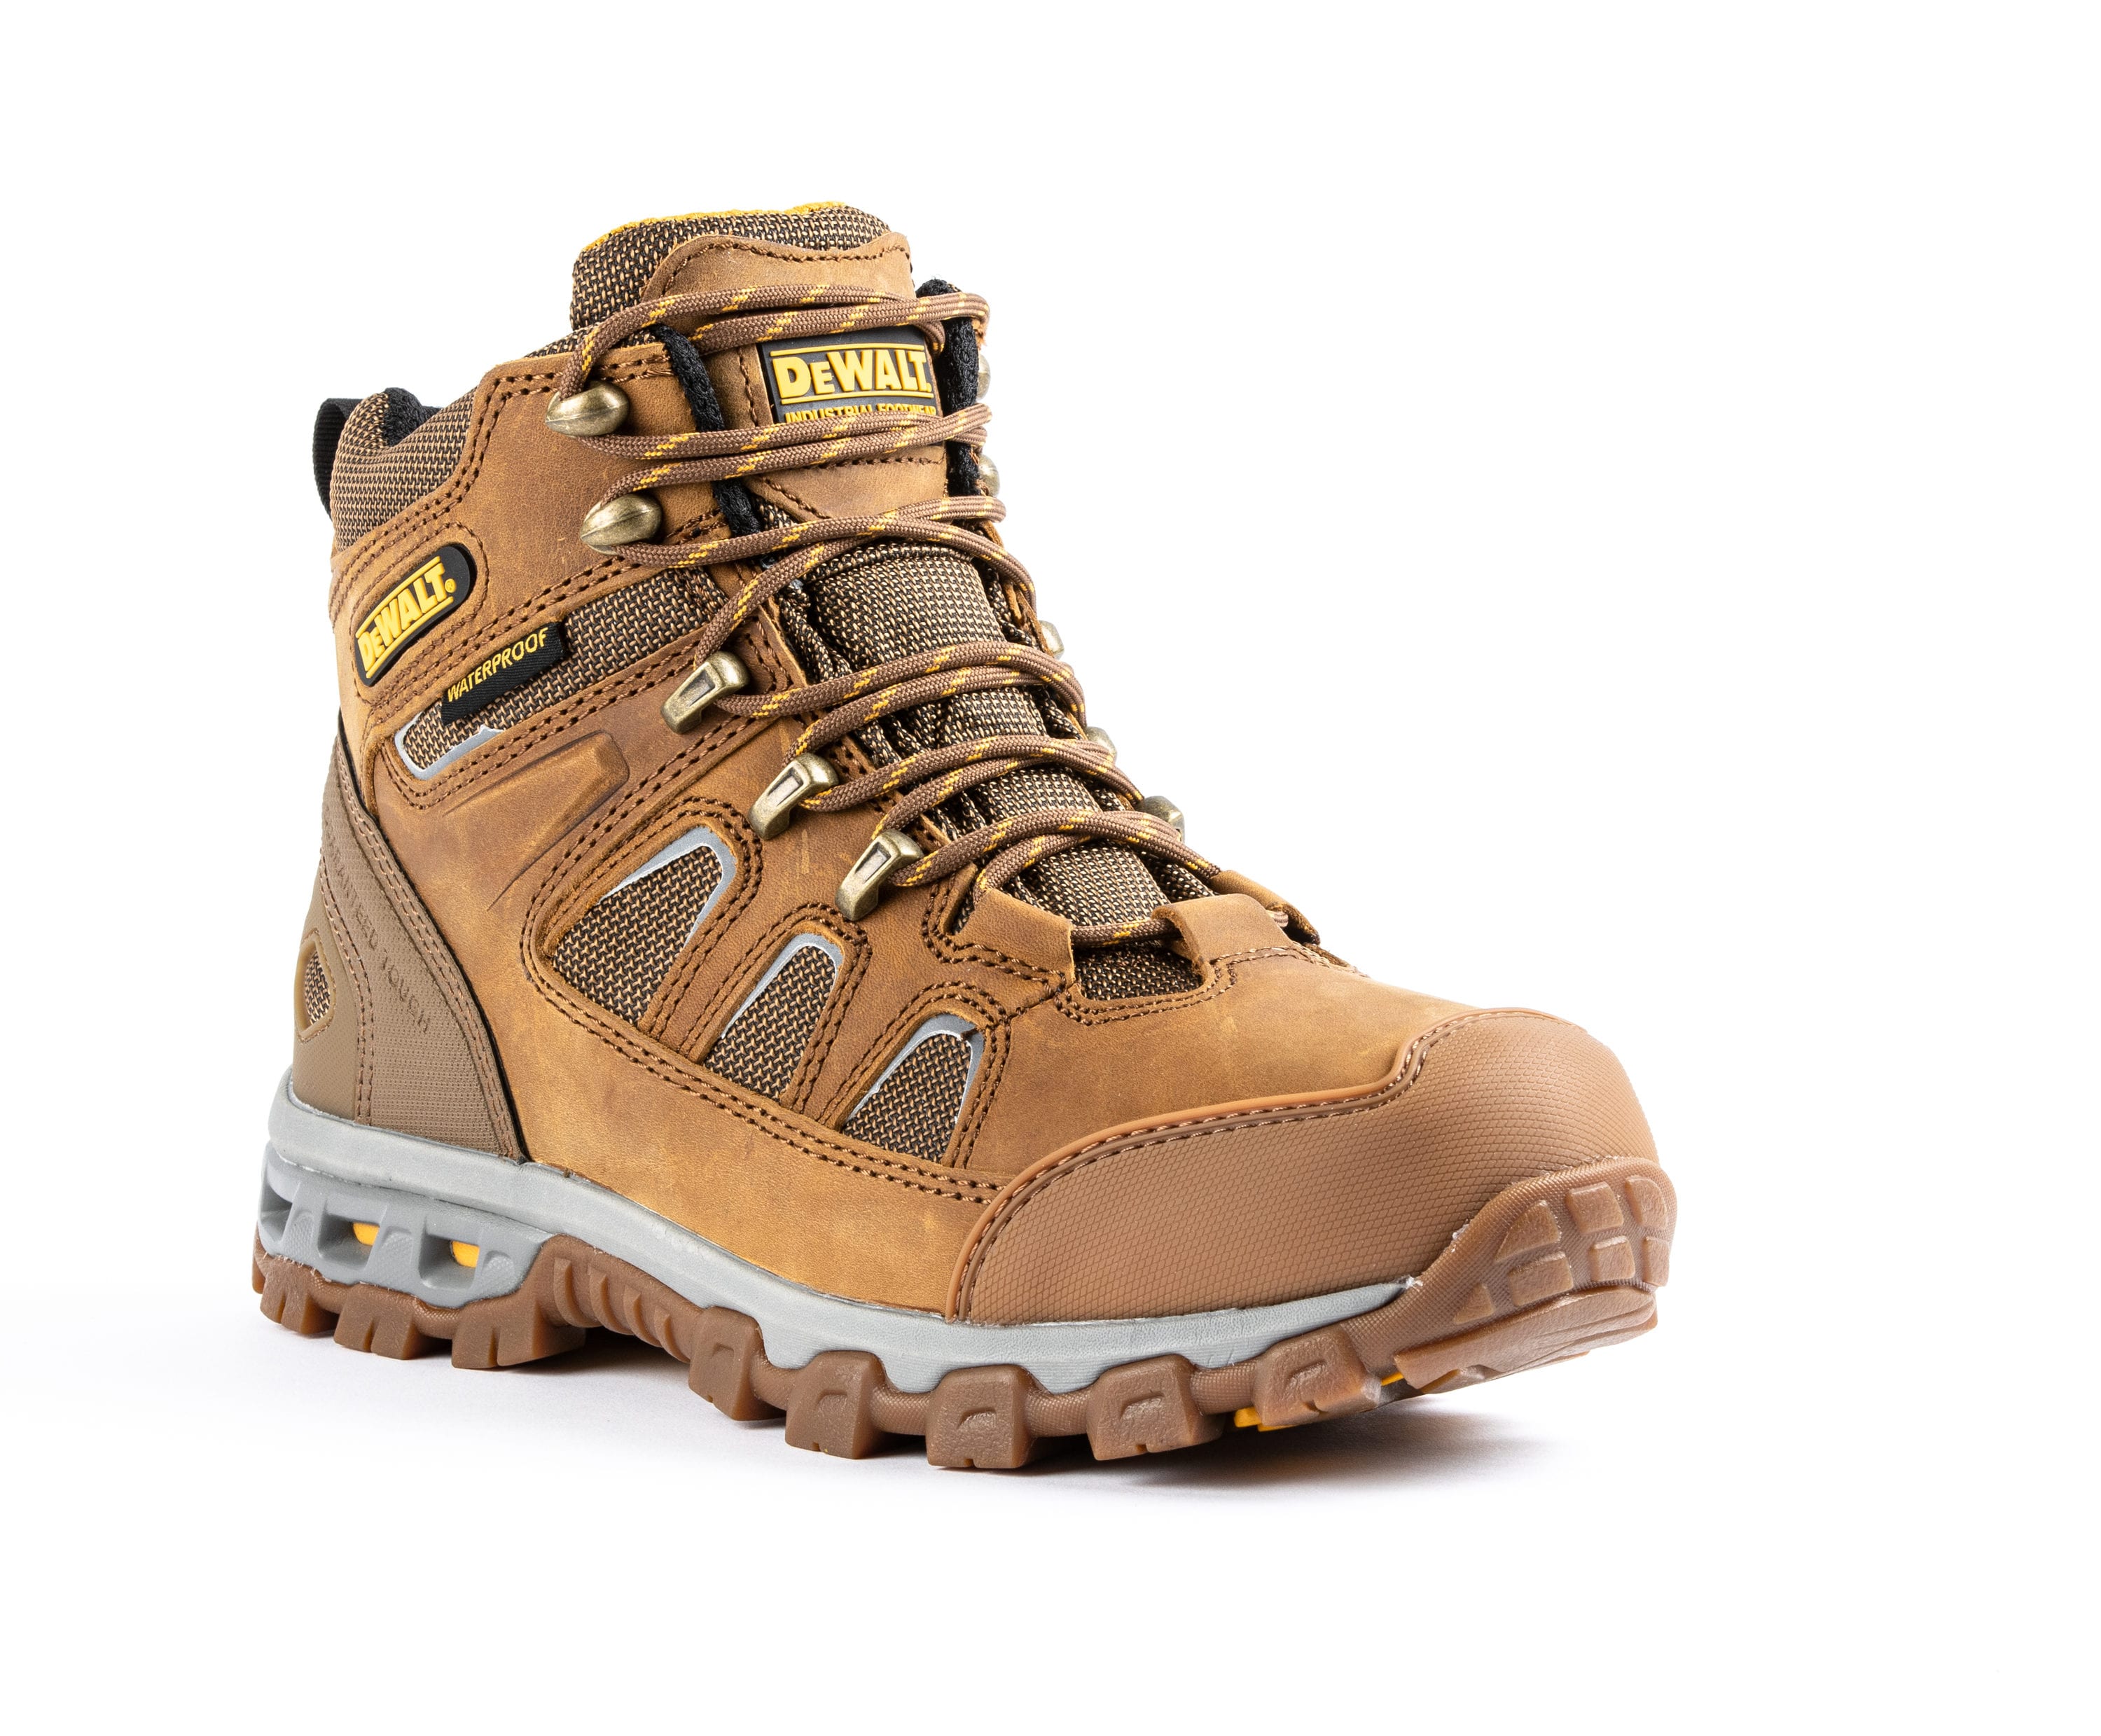 DEWALT Mens Poseidon Work Boots Size: 7 Medium in the department at Lowes.com